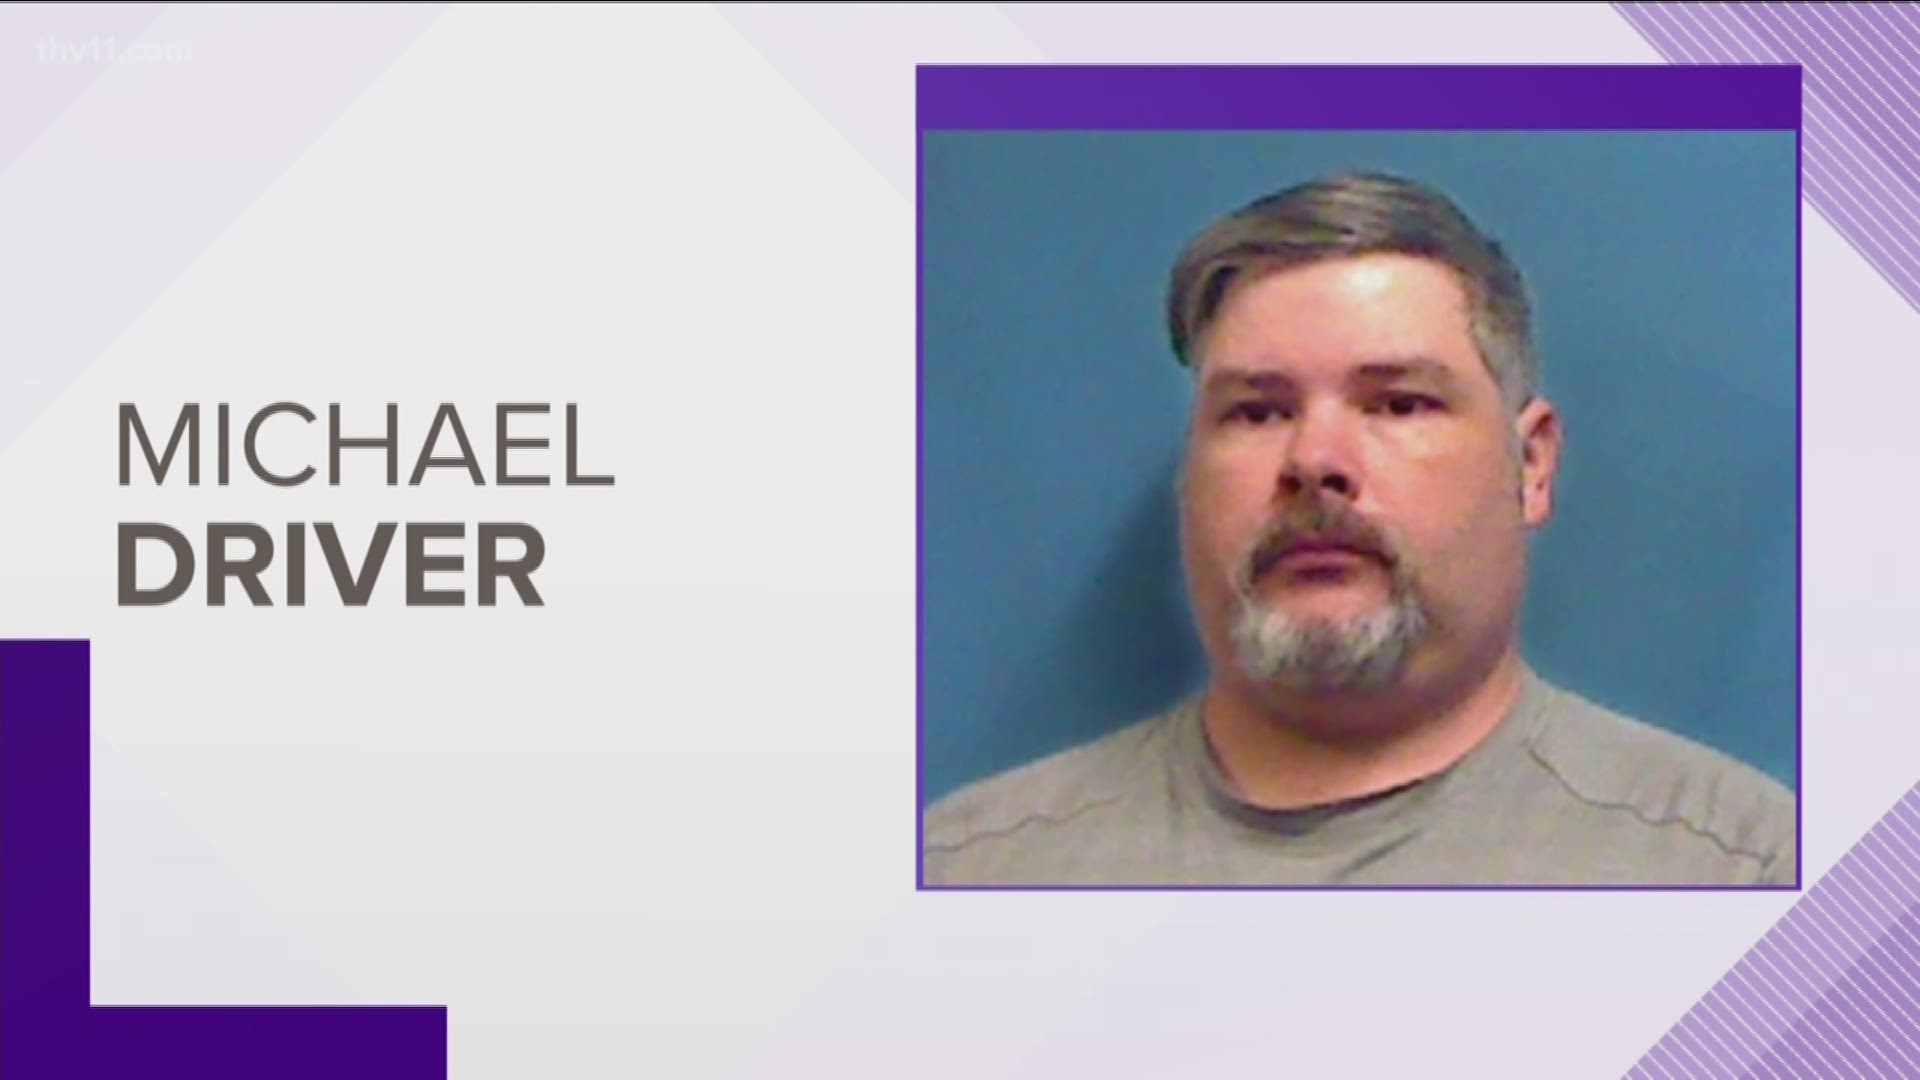 A Morrilton man bonds out of jail after he's charged with raping a pre-teen girl with special needs.